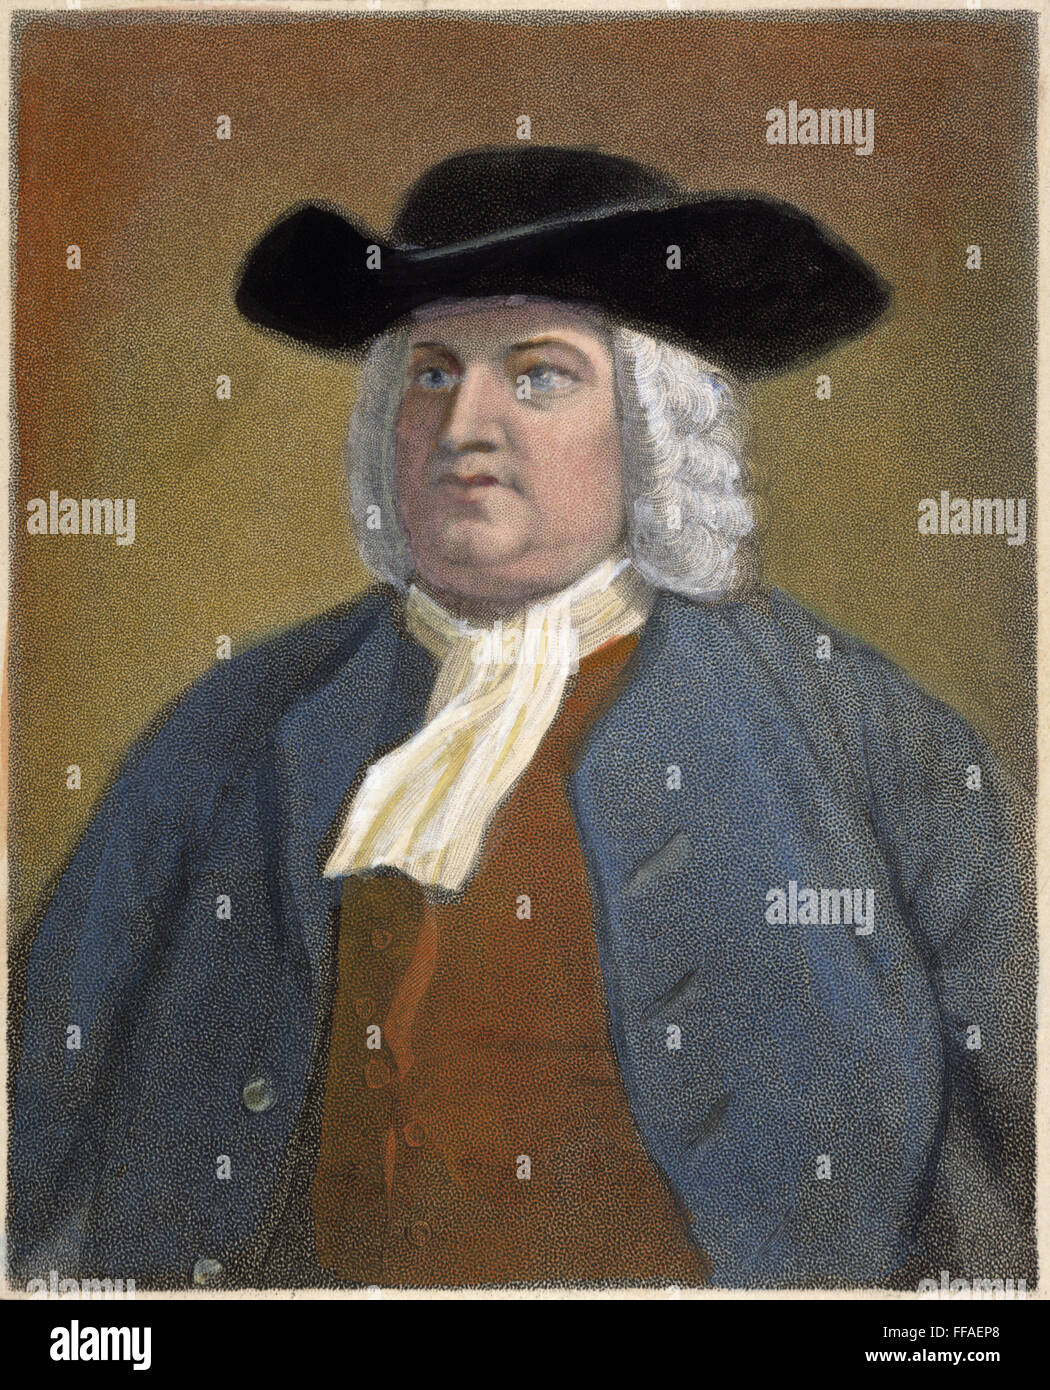 WILLIAM PENN (1644-1718). /nEnglish religious reformer and colonialist: colored stipple engraving, 19th century. Stock Photo